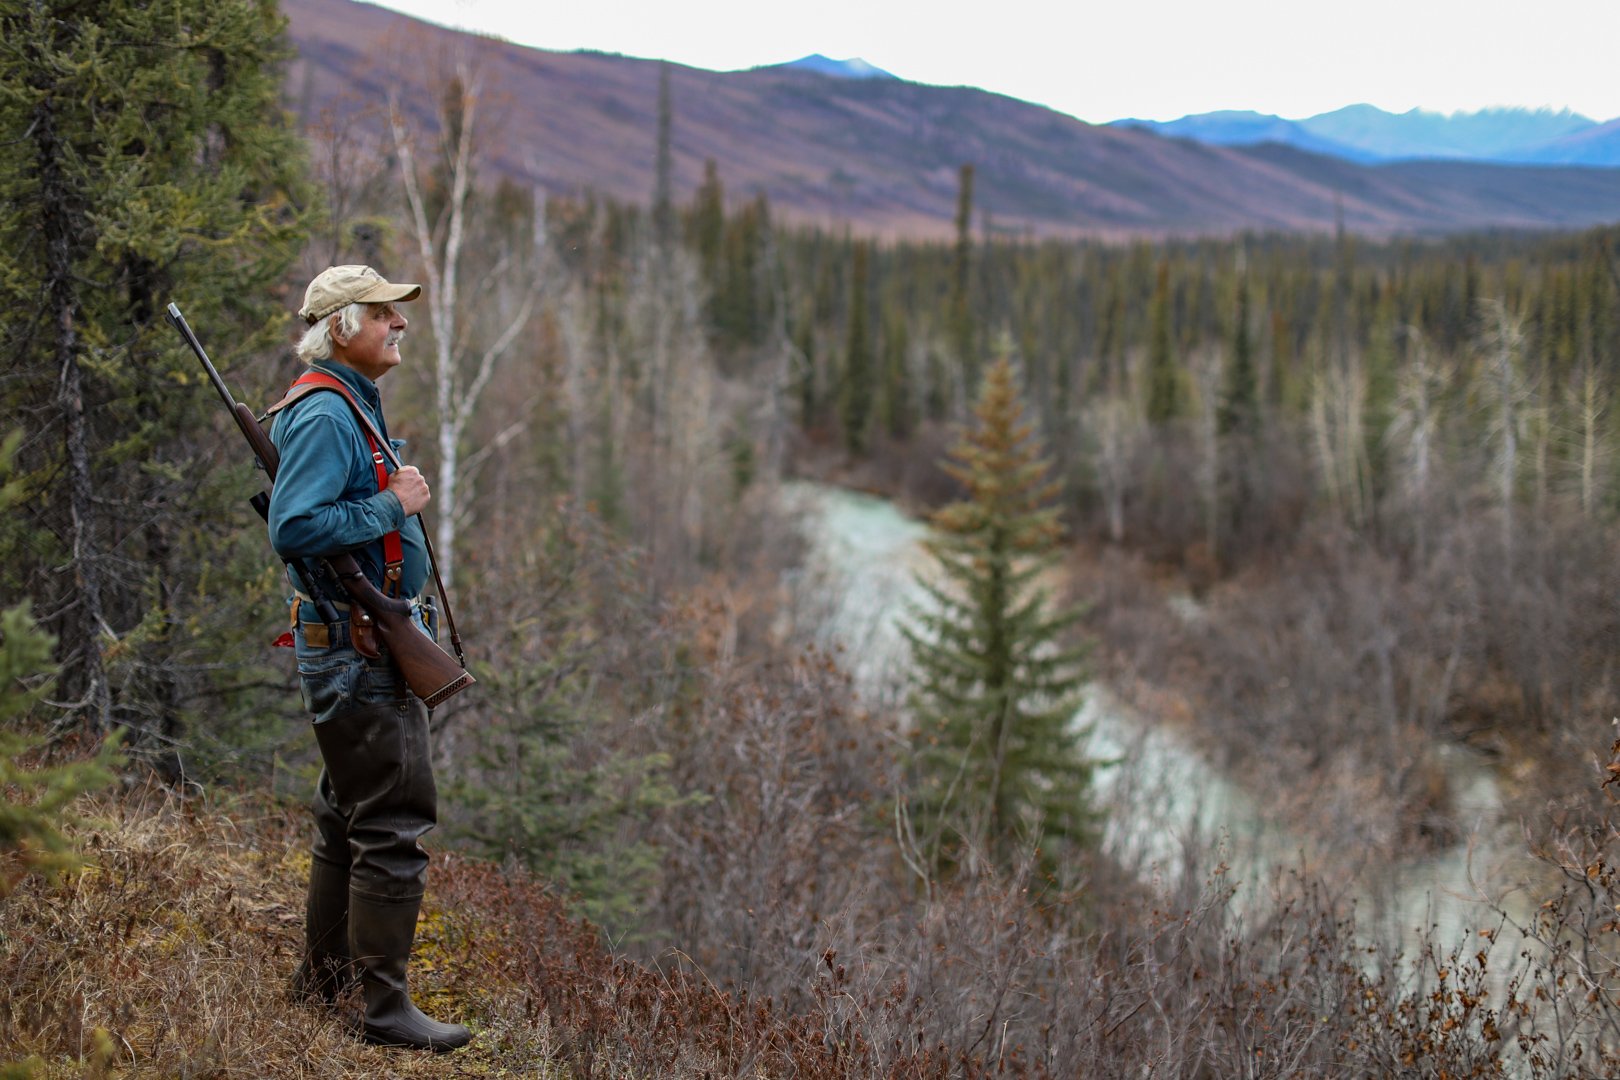  Steve looks out over the country while scouting for moose during the rut in the Brooks Range on Wednesday, October 4, 2020. Getting a moose in the fall is a critical part of the seasonal cycle and can provide meat for the entire winter if stored pro